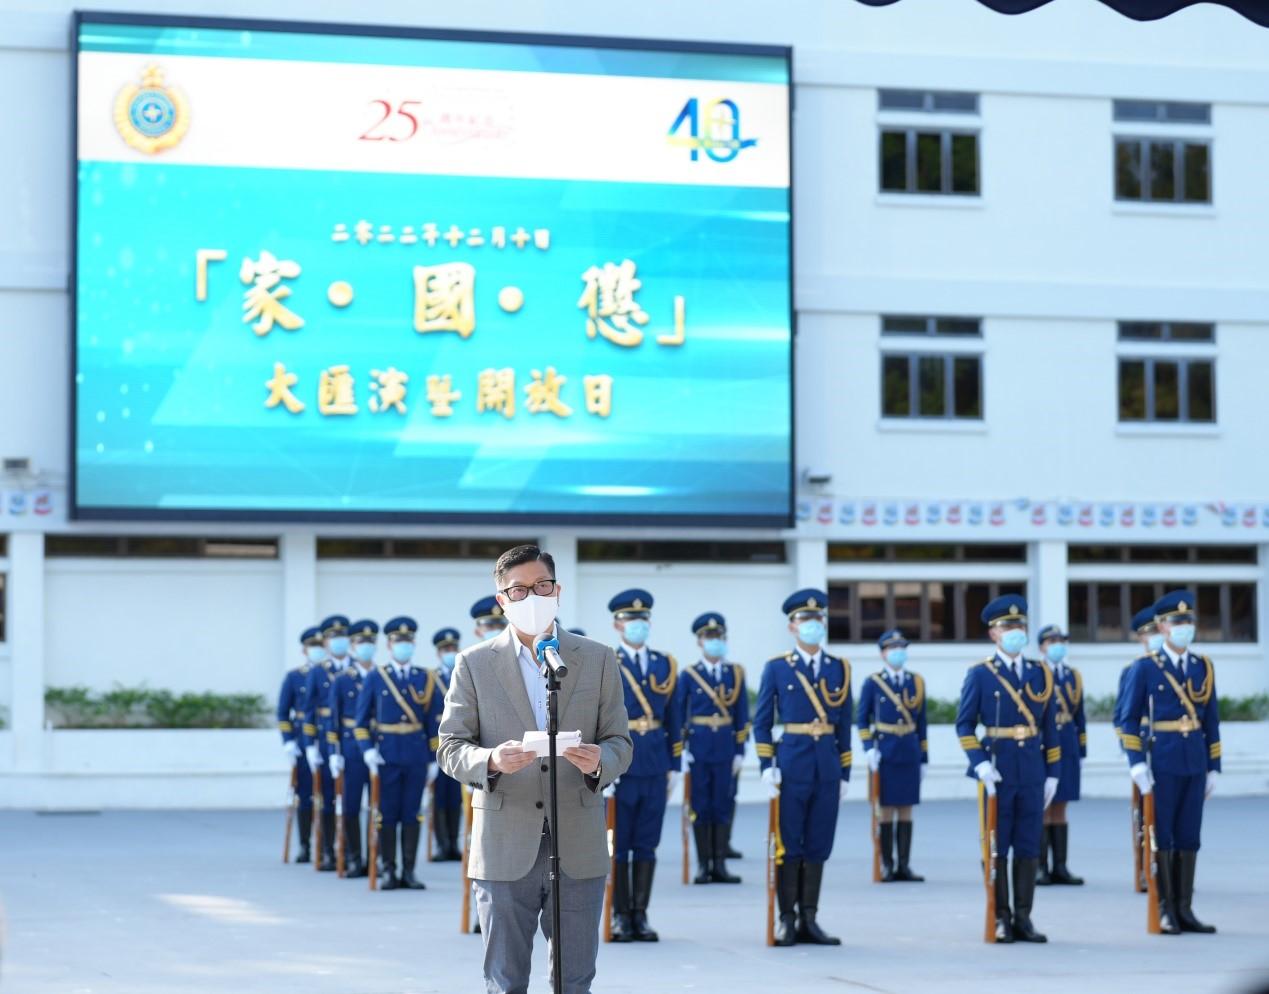 The Correctional Services Department today (December 10) held the Grand Performance cum Open Day at the Hong Kong Correctional Services Academy. Photo shows the Secretary for Security, Mr Tang Ping-keung, delivering a speech at the opening ceremony of the Open Day.